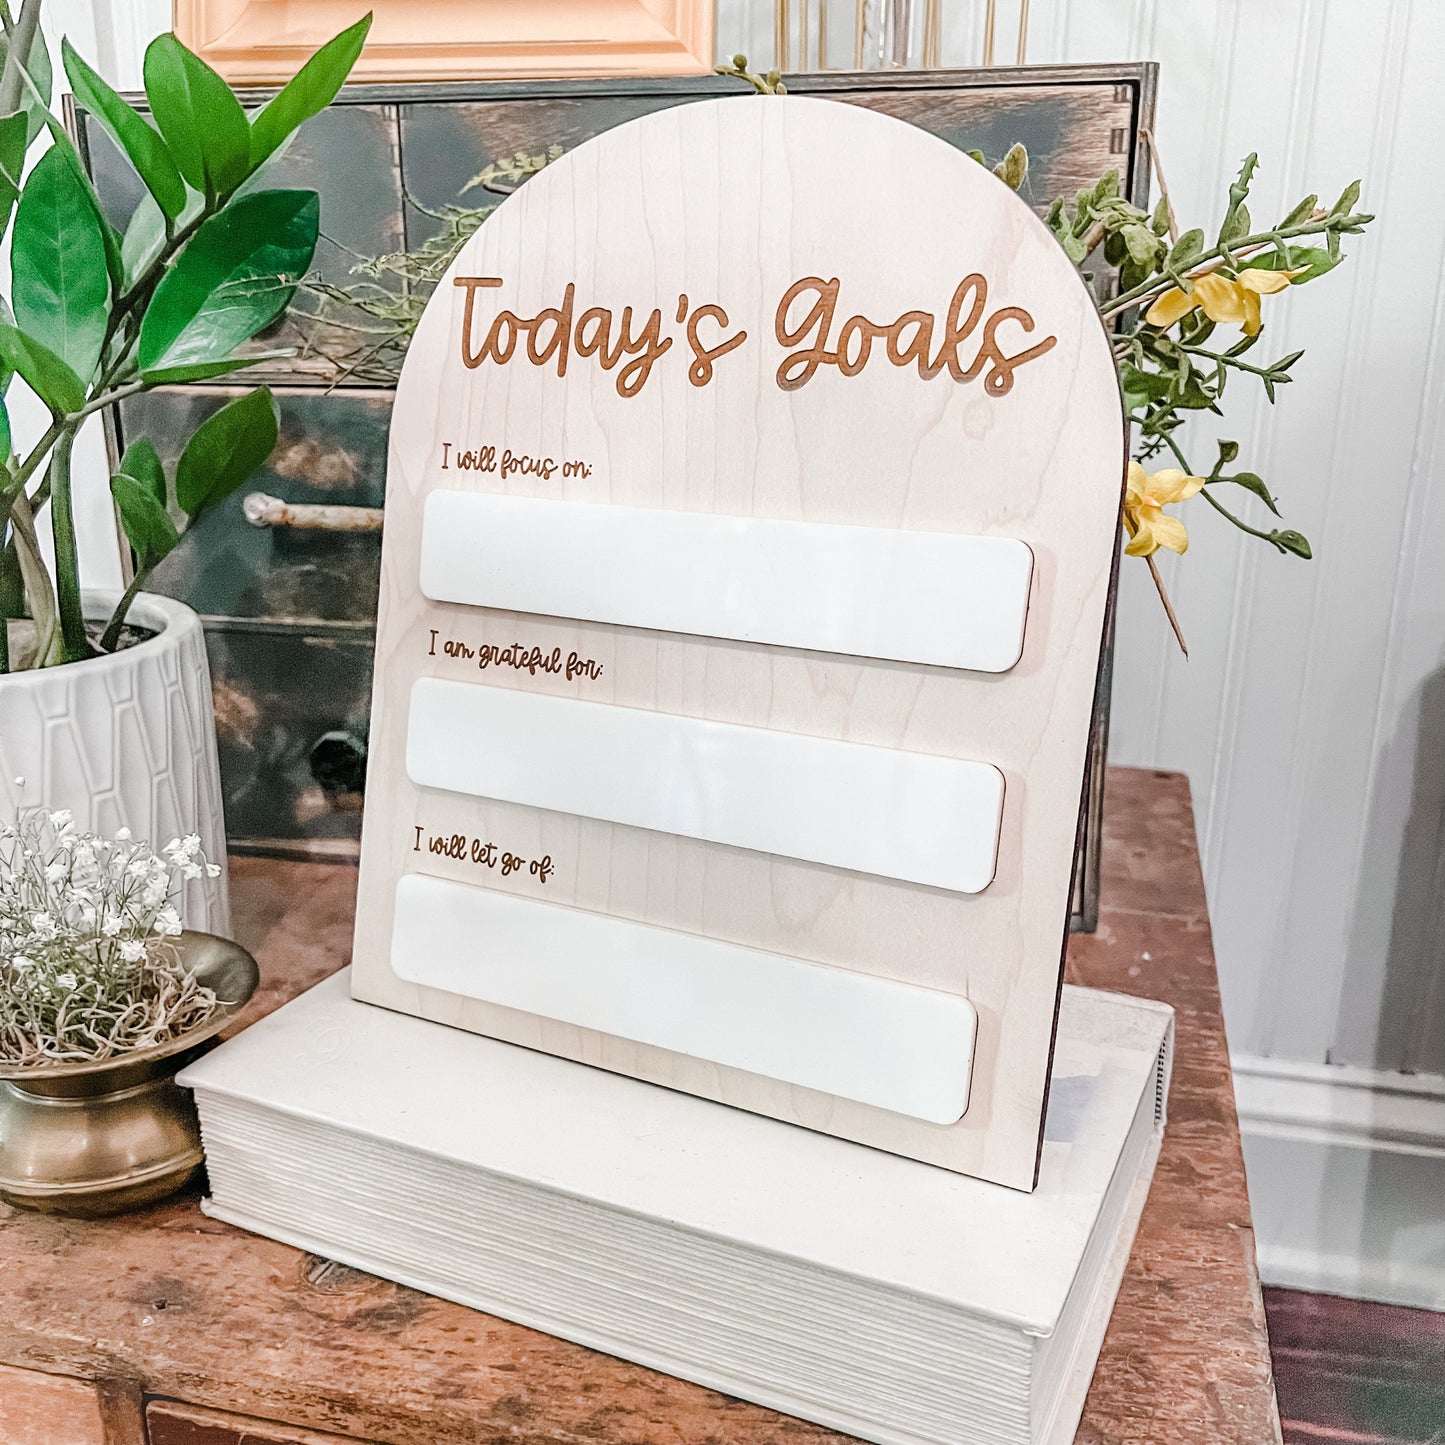 Today’s Goals Dry Erase Board | Office Decor | Dry Erase Board | Handmade | Boho Arch Sign | Self Care Affirmations